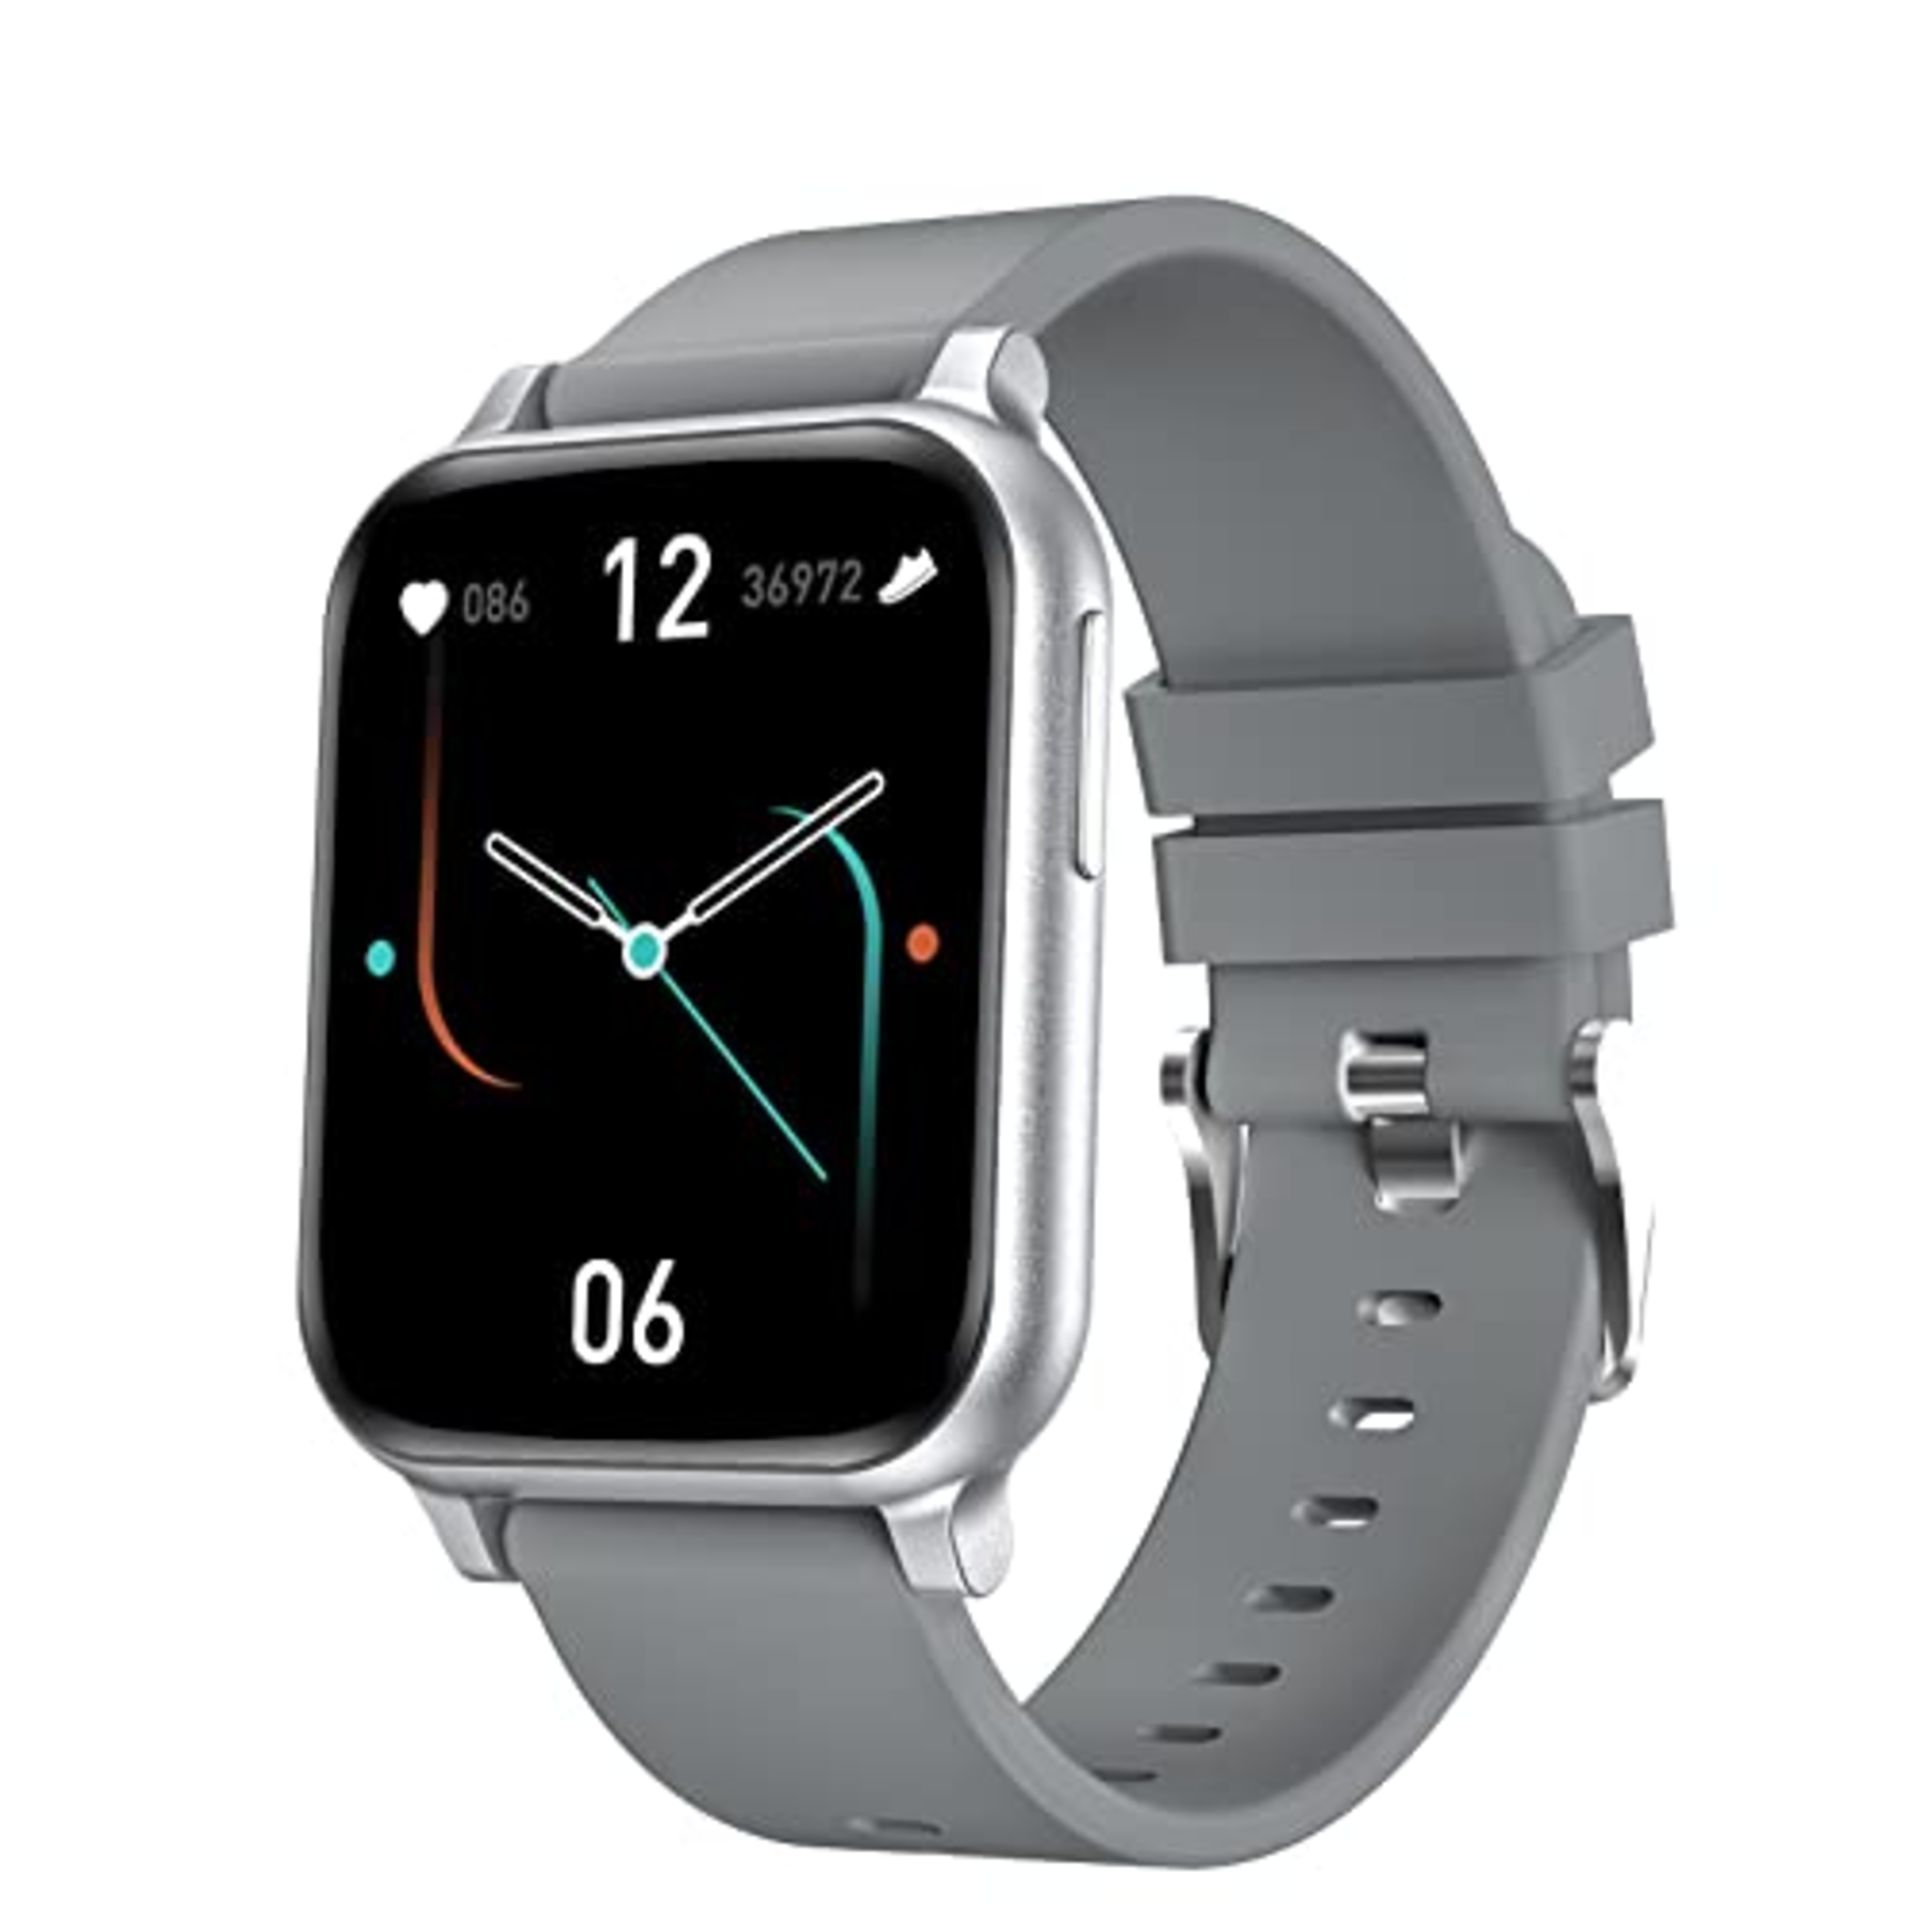 RRP £18.97 AiMoonsa Smart Watch for Android and iOS Phone with 1.69" Touch Screen - Image 2 of 4